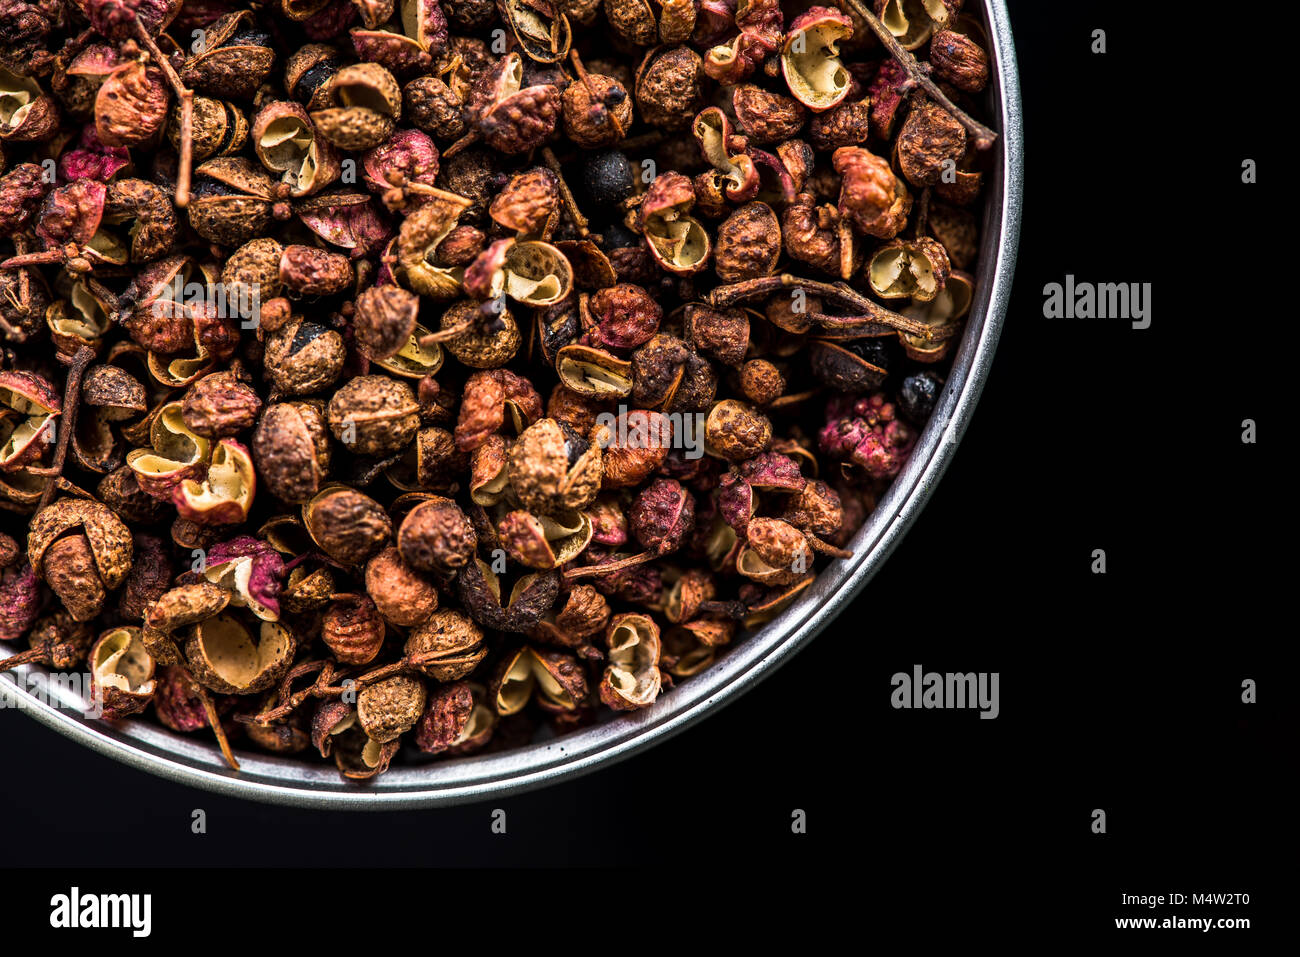 Sichuan pepper on pot on dark background with copy space. Stock Photo